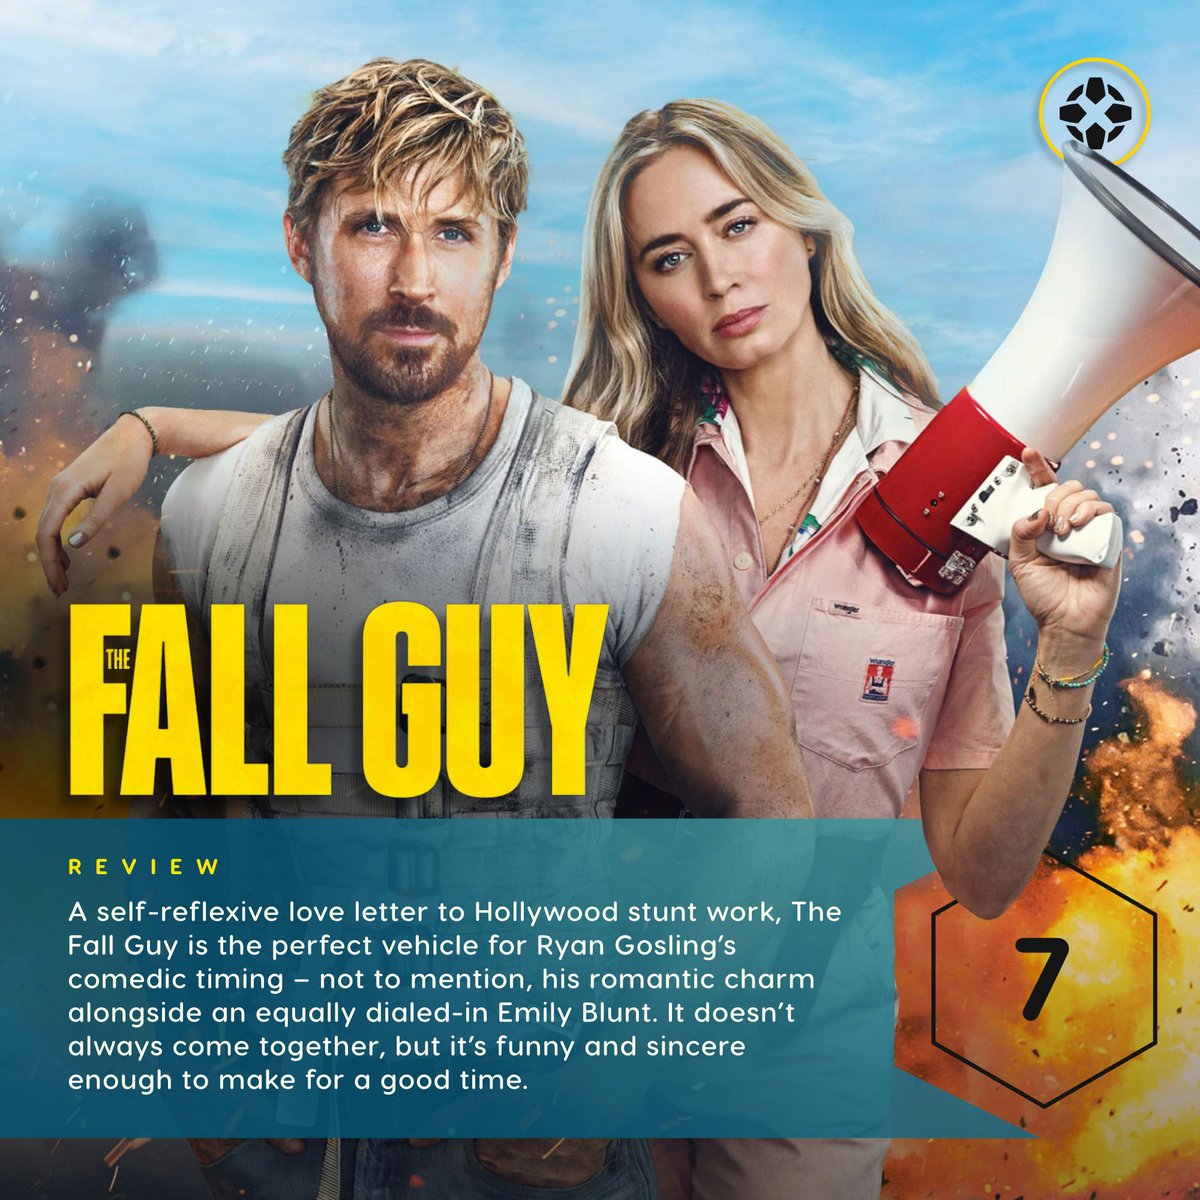 The Fall Guy, now out in theaters, sees Ryan Gosling leveling up even from the heights of Barbie, in his funniest role till date. Our review: bit.ly/3wUXYul